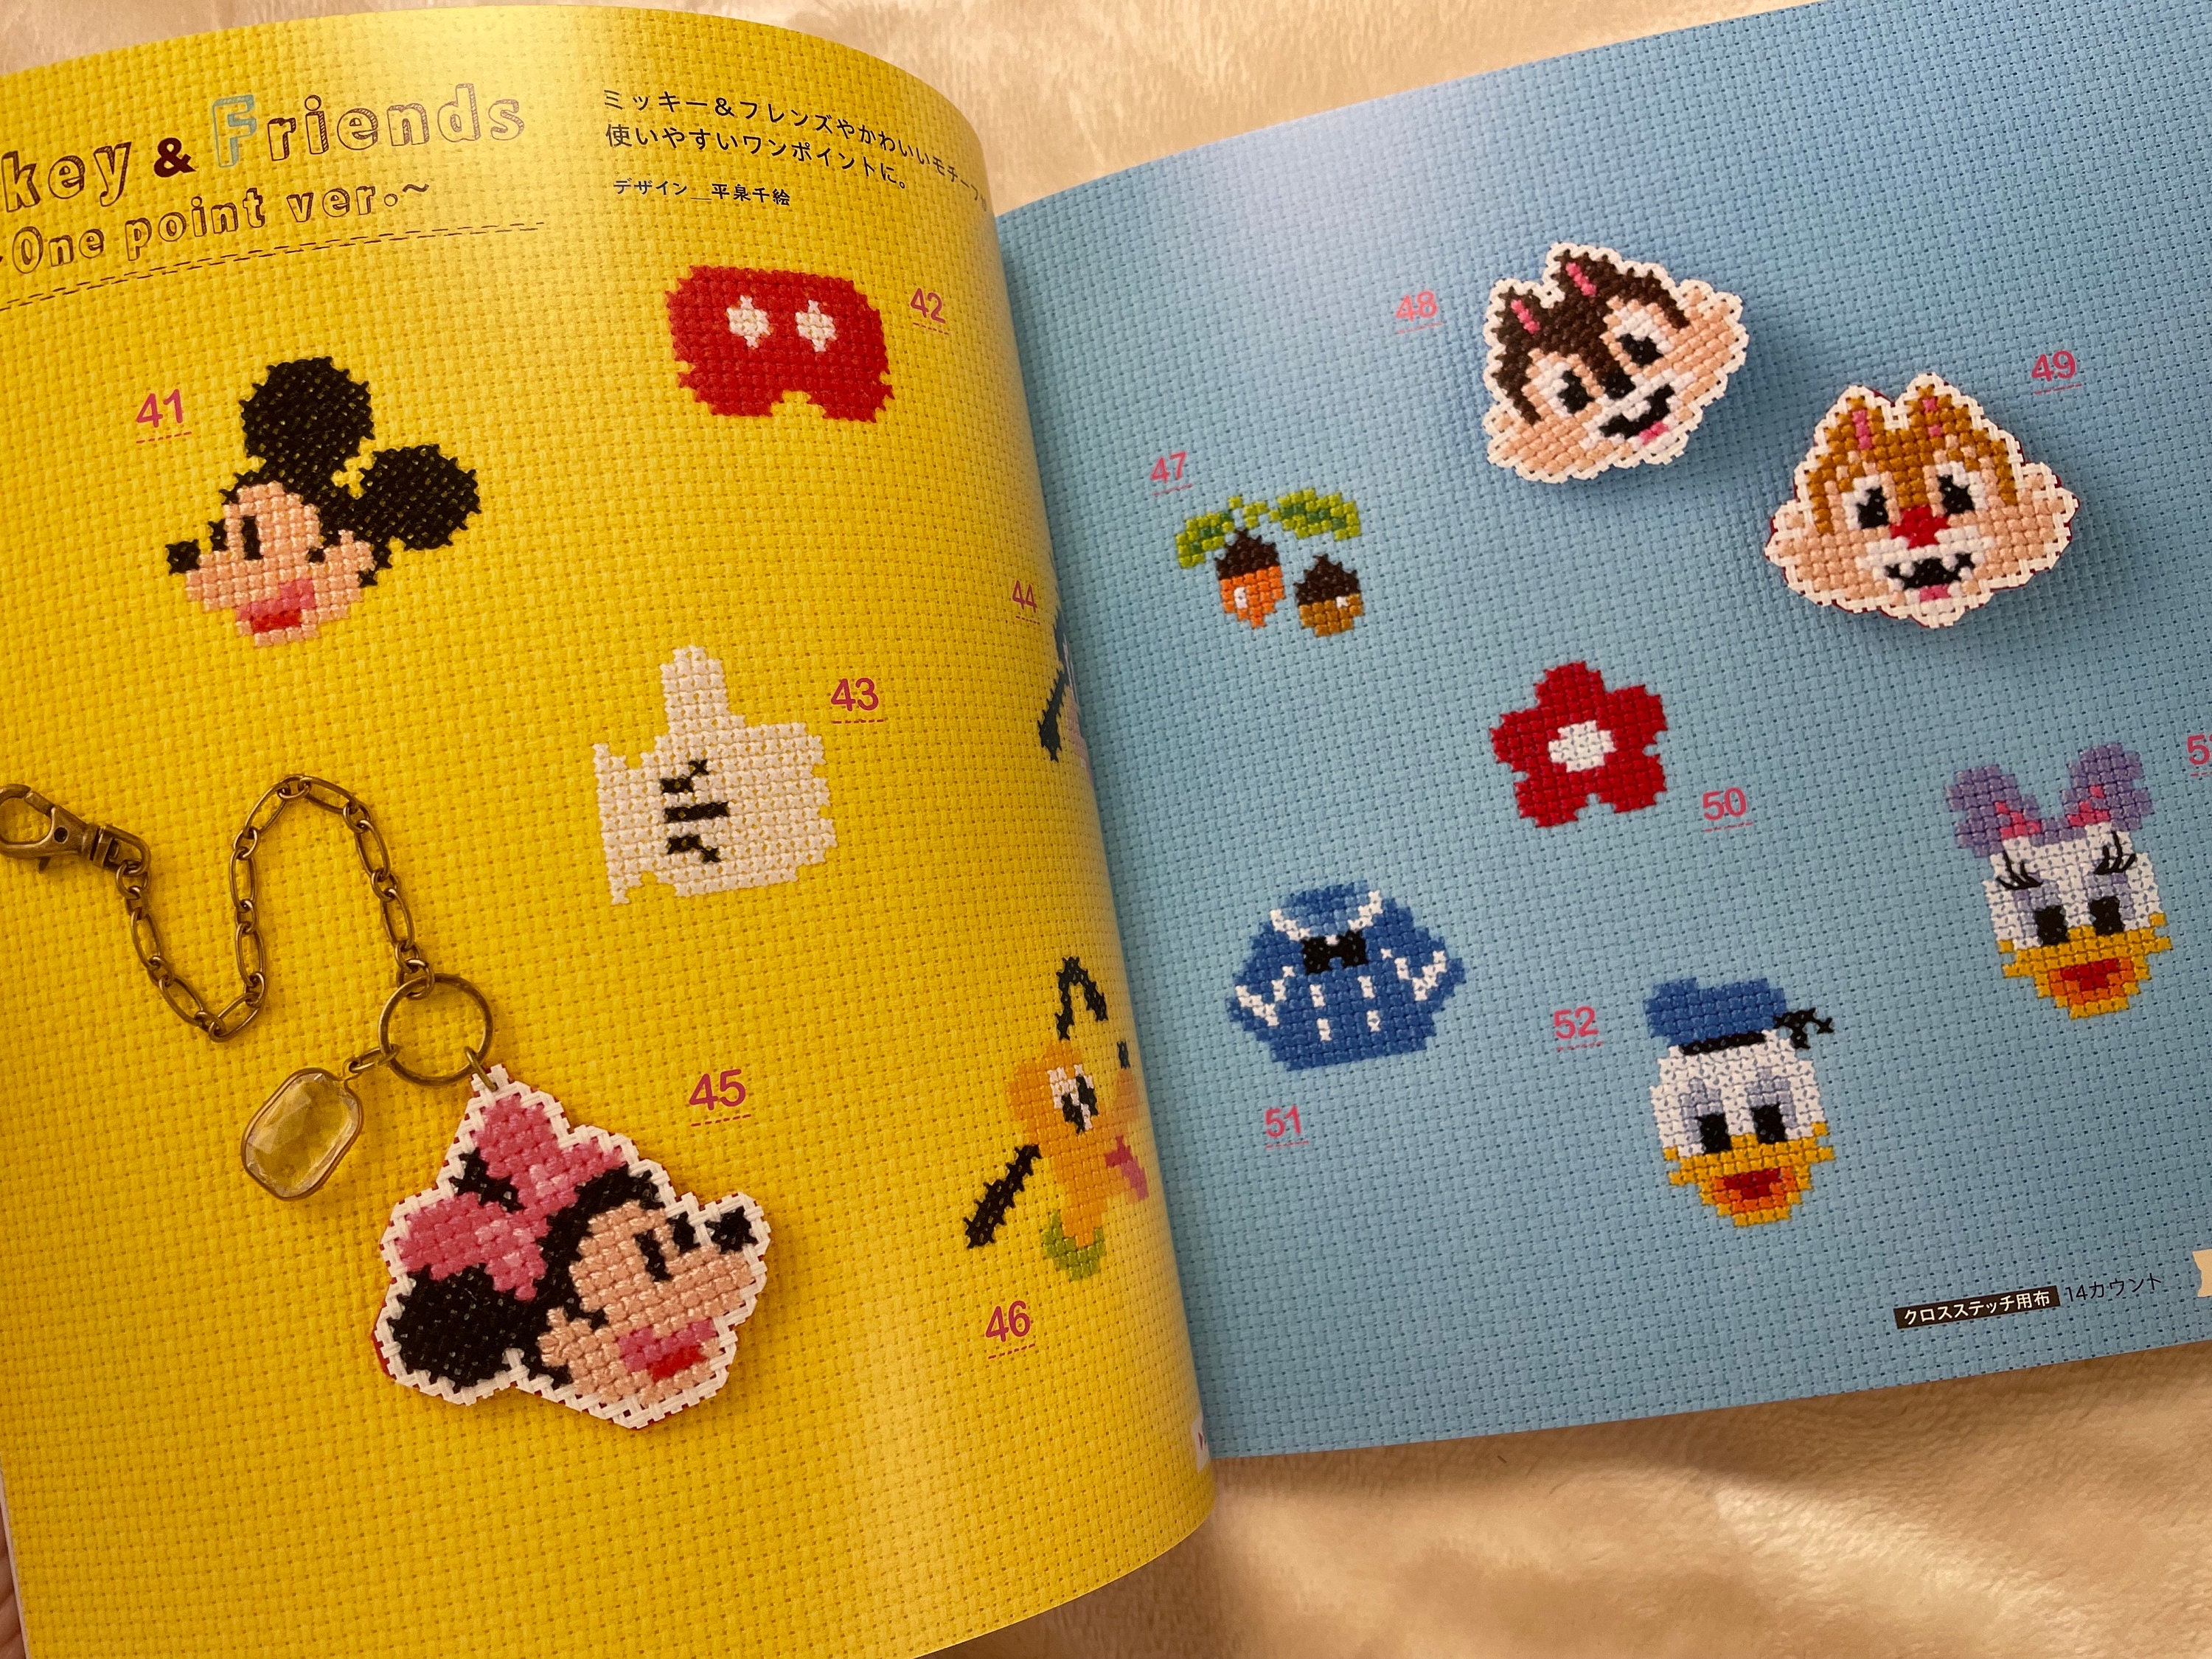 CDJapan : Disney Cross Stitch December 27, 2023 Issue Hachette Collections  Japan BOOK